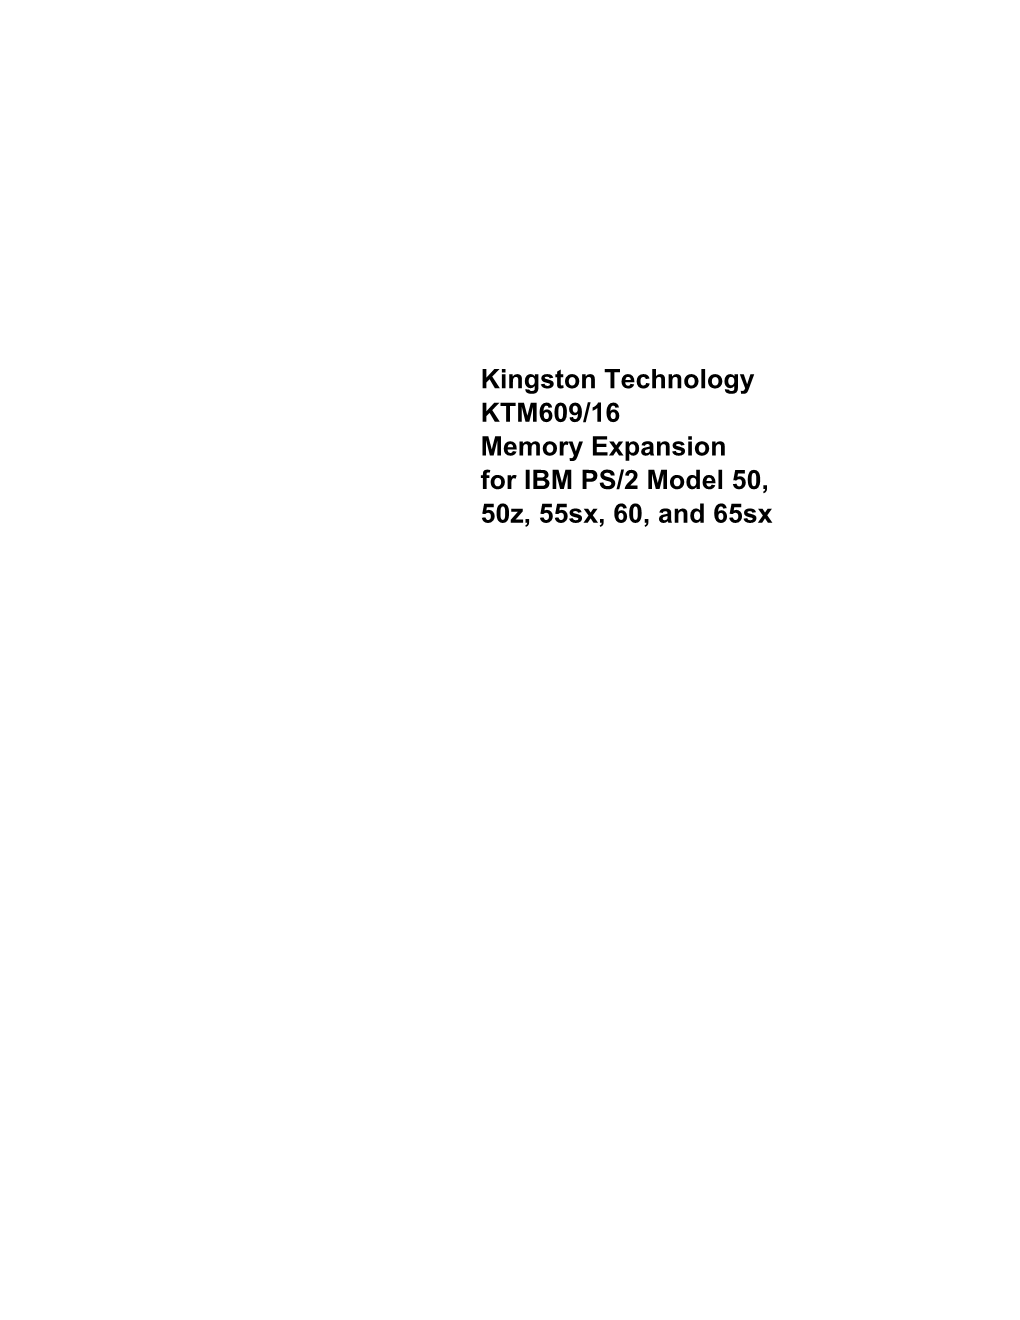 Installation Guide for KTM609/16 for IBM PS/2 Model 50, 50Z, 55Sx, 65Sx Computers